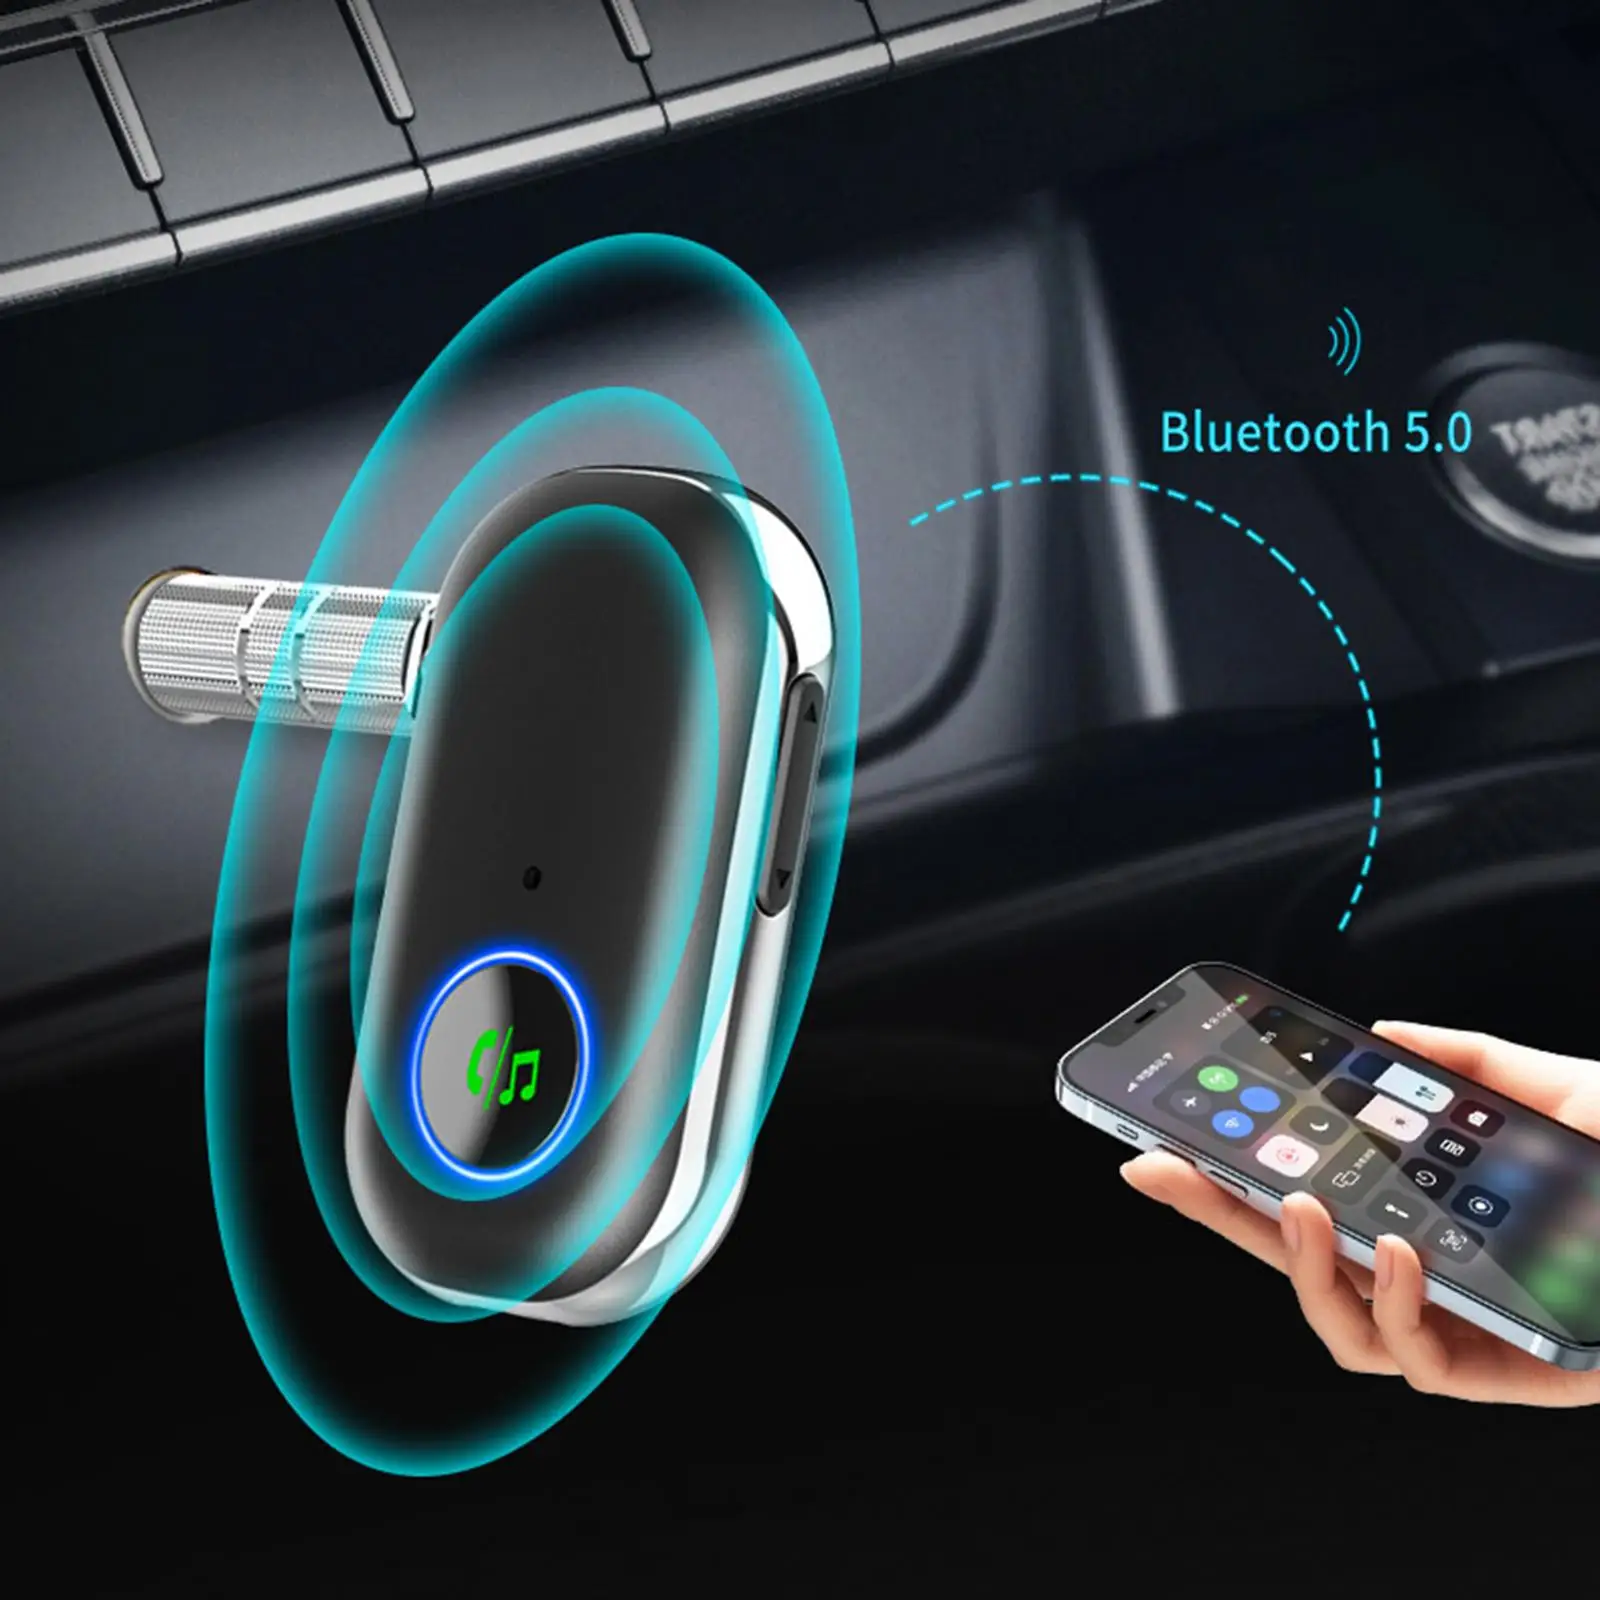 Bluetooth 5.0 Receiver for Car Bluetooth Car Adapter Portable with Volume Control with 3.5mm Audio Cable for Hands Free Call